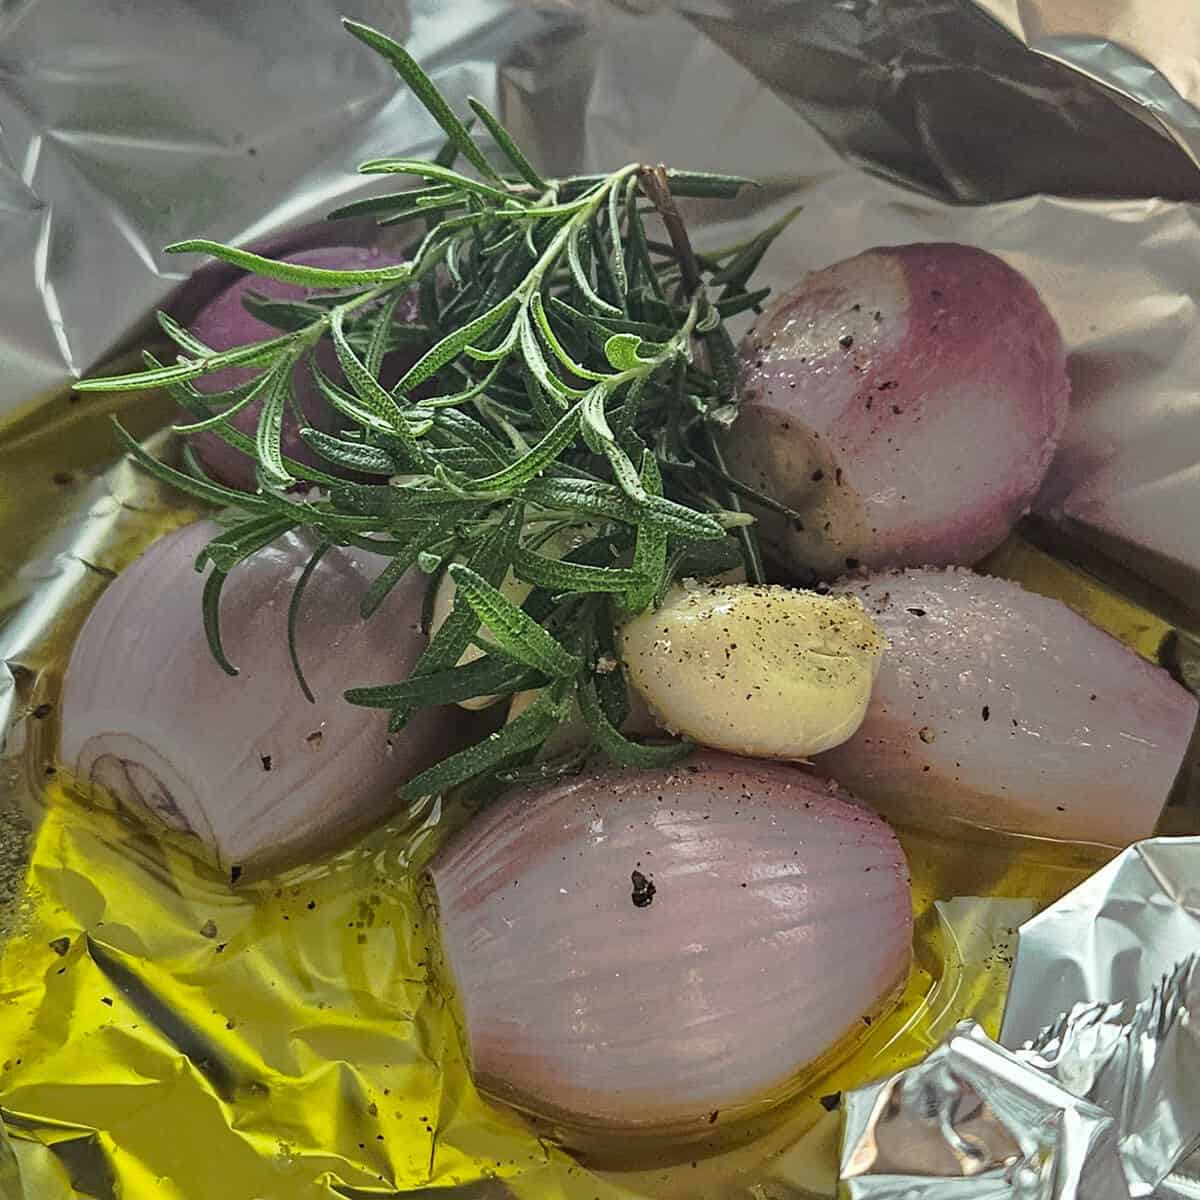 the shallots, garlic, and rosemary in foil with olive oil and salt and pepper ready to place in the oven, for the potato and shallot soup with crispy prosciutto